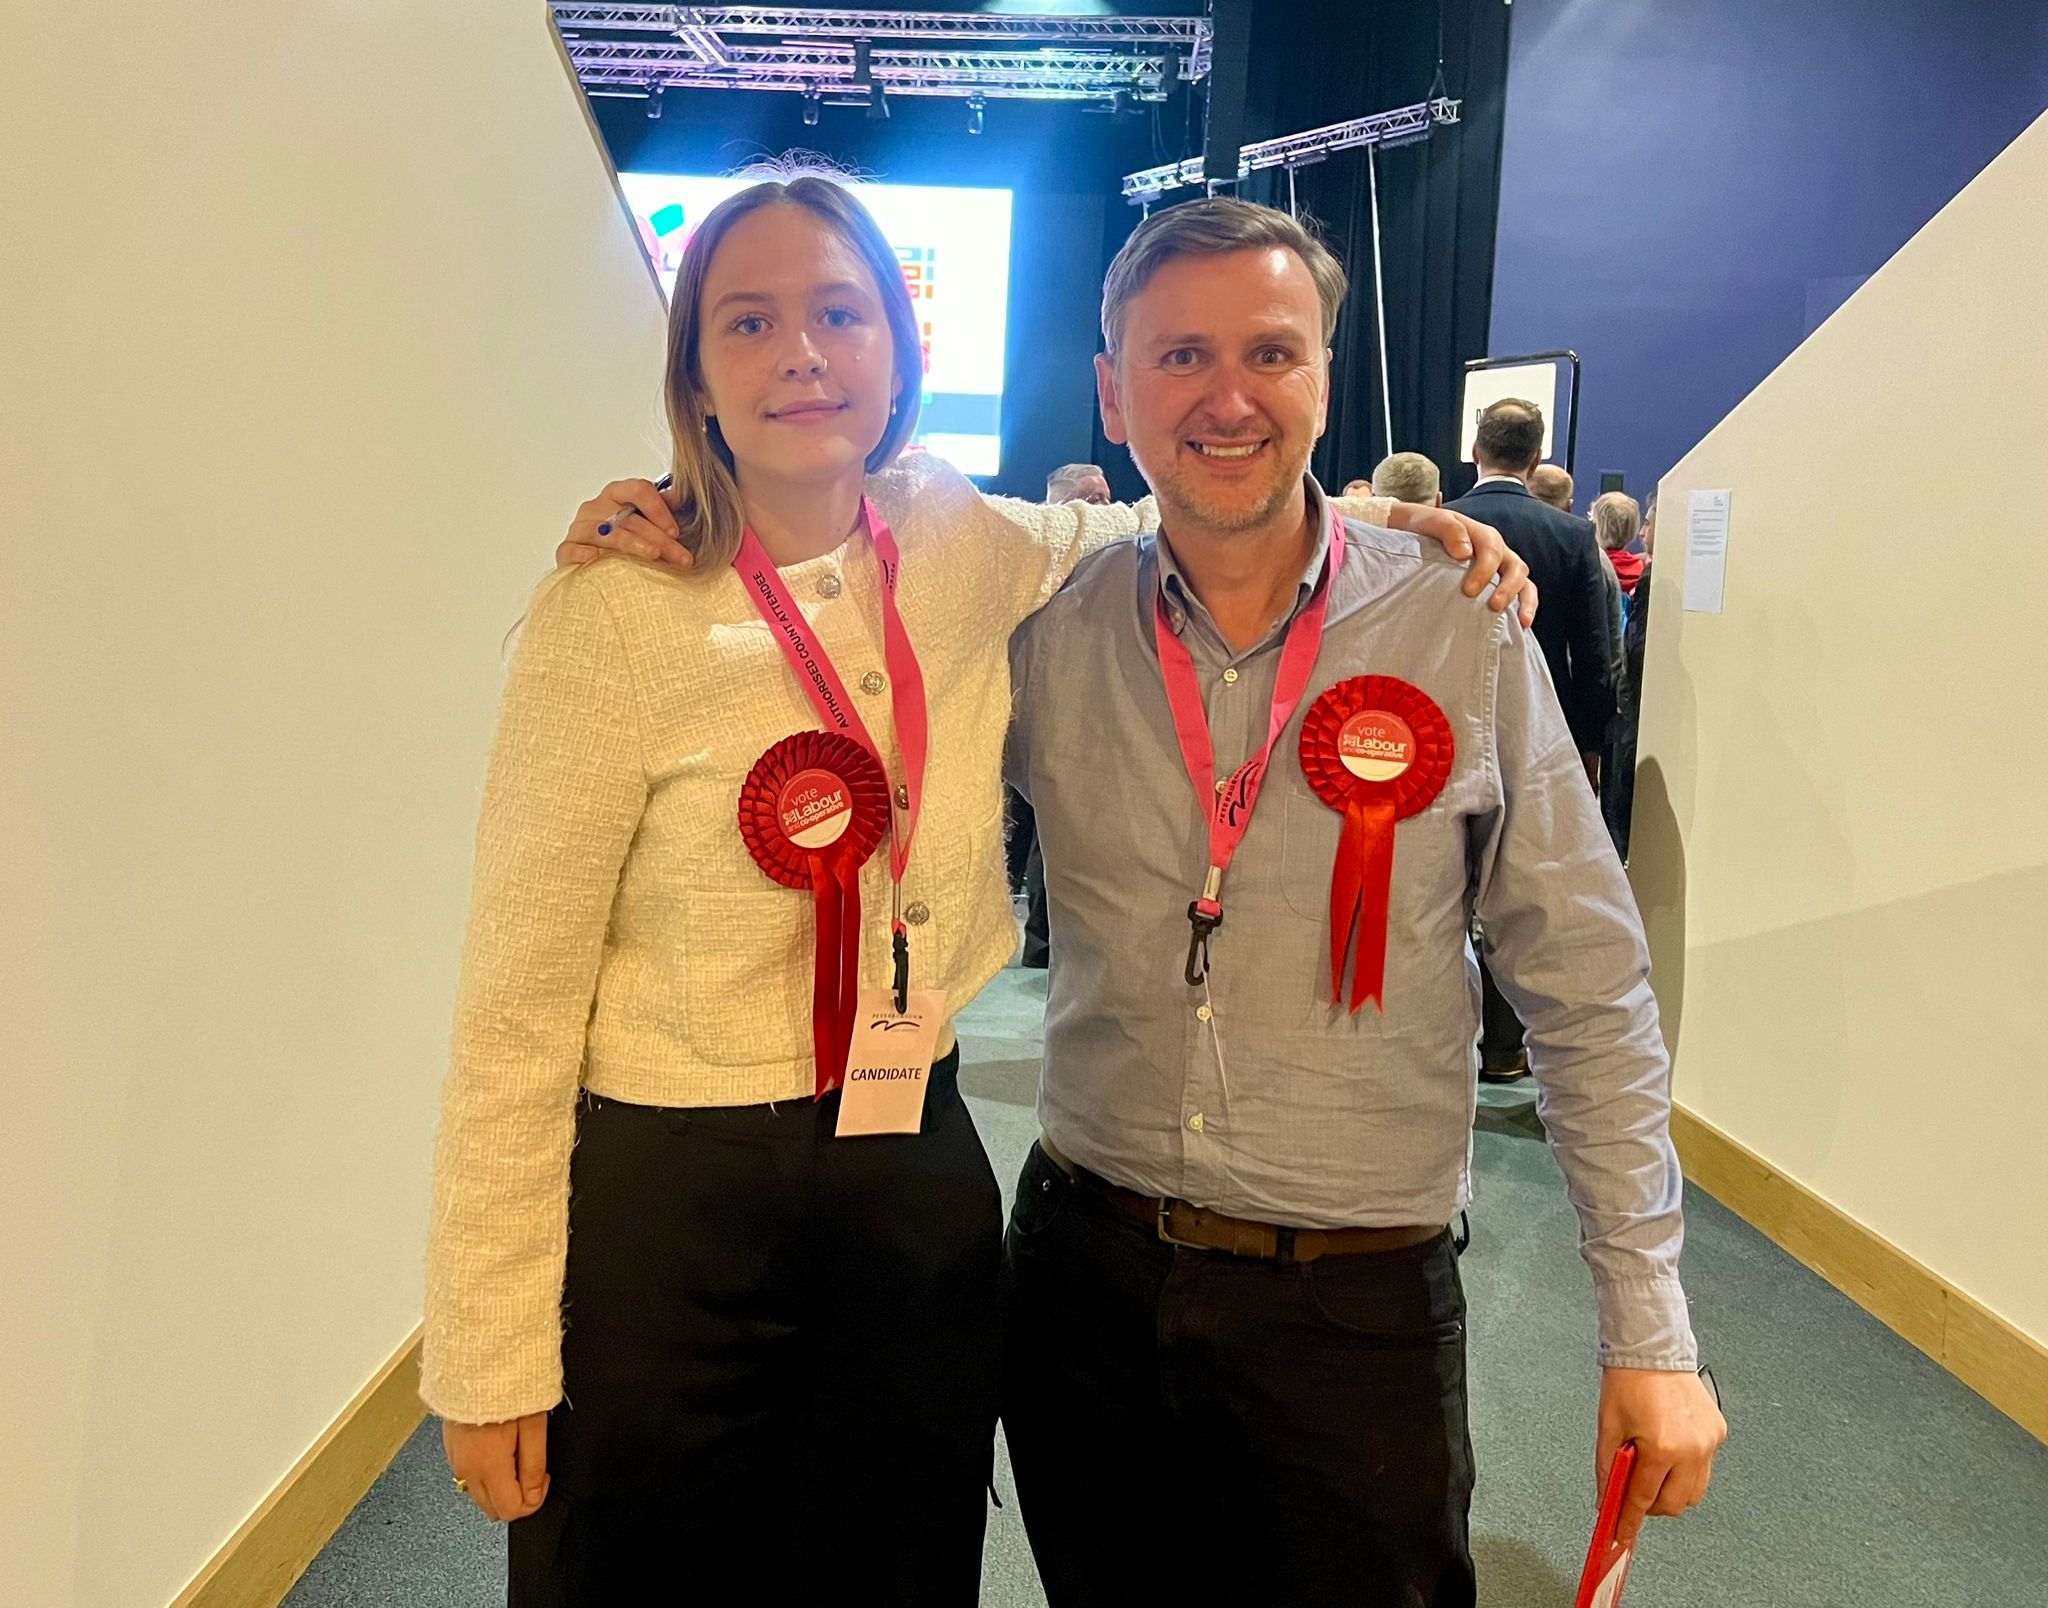 Daisy Blakemore-Creedon with Andrew Pakes, Labour’s candidate for Peterborough in the coming general election